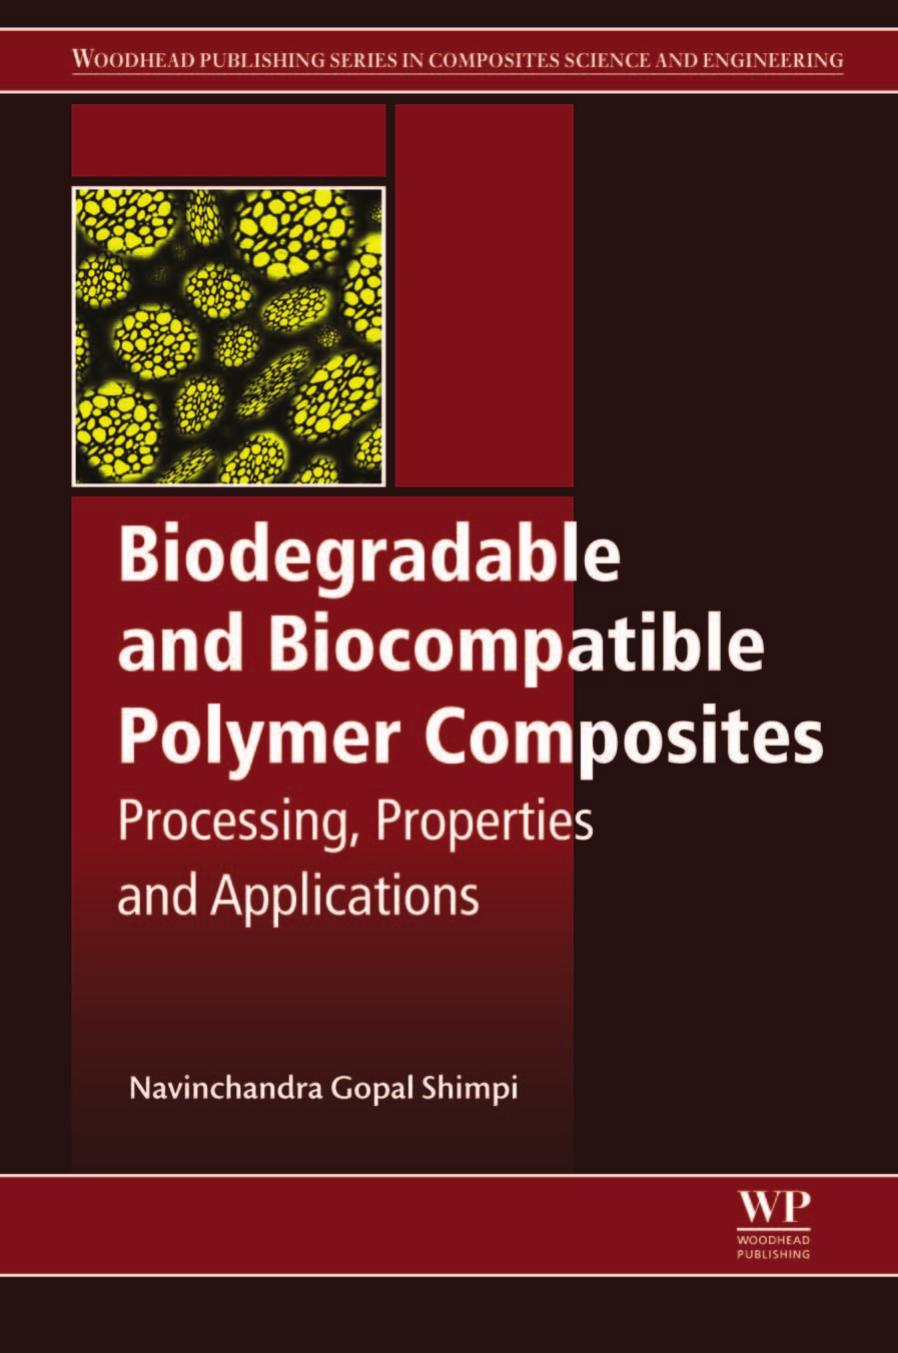 Biodegradable and Biocompatible Polymer Composites: Processing, Properties and Applications